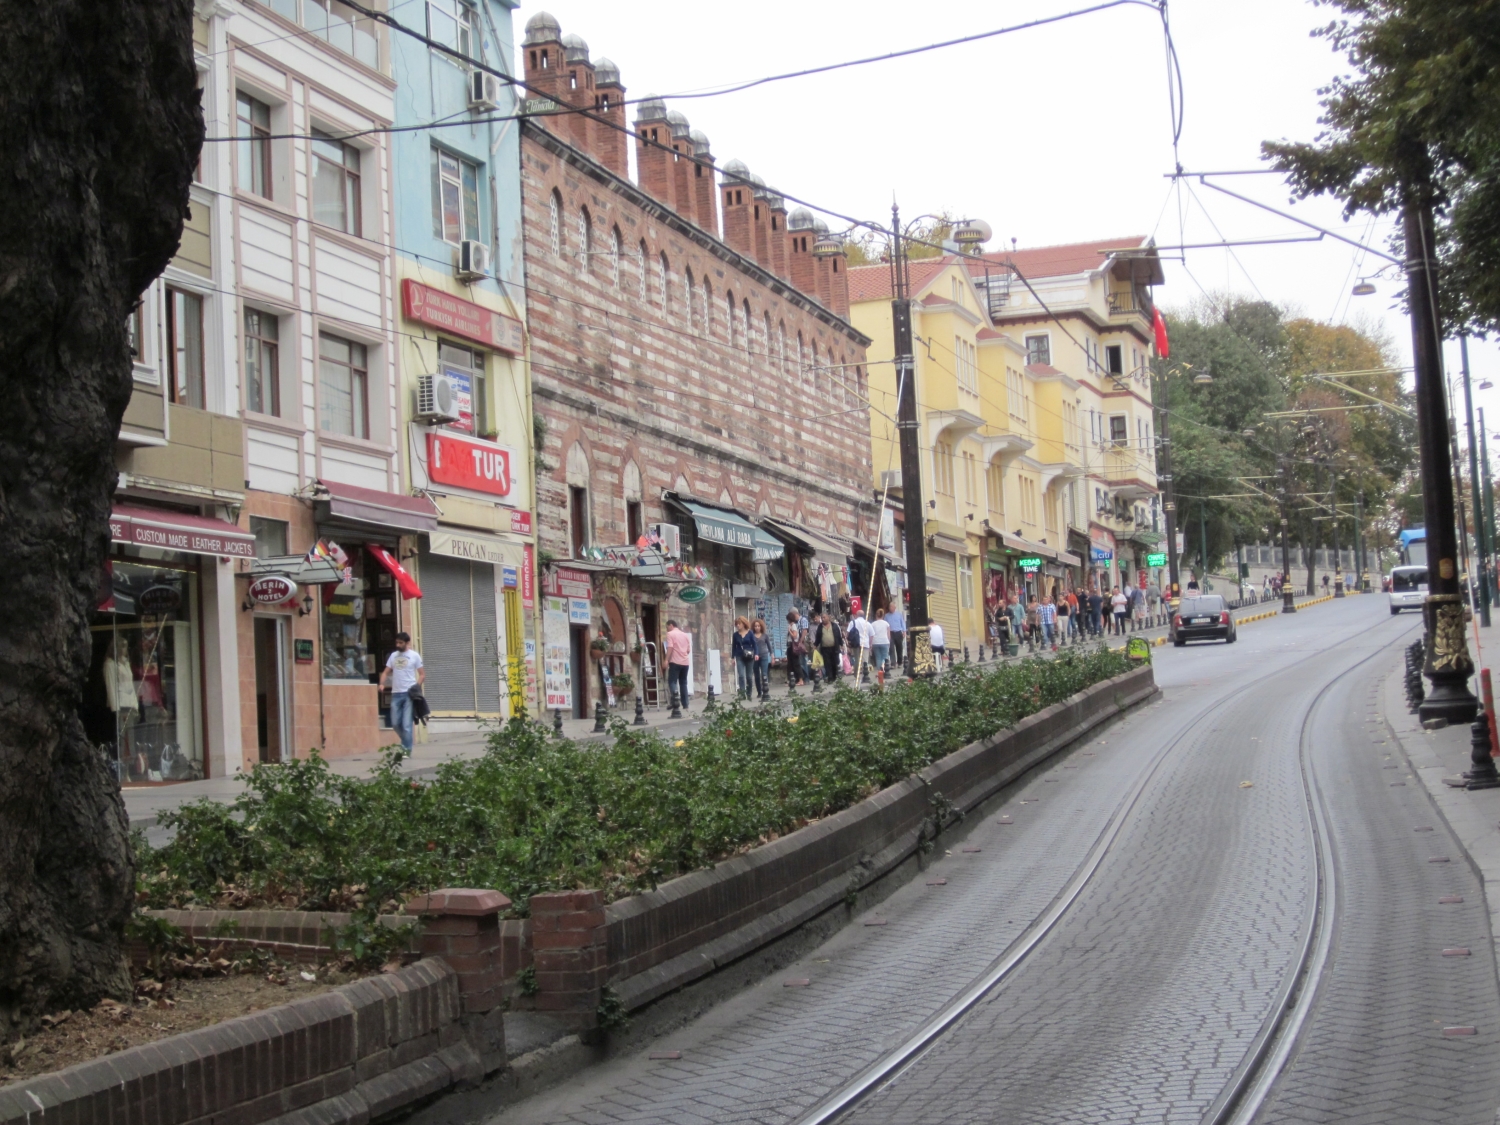  Istanbul - Alemdar Cd, street lined with Ottoman buildings